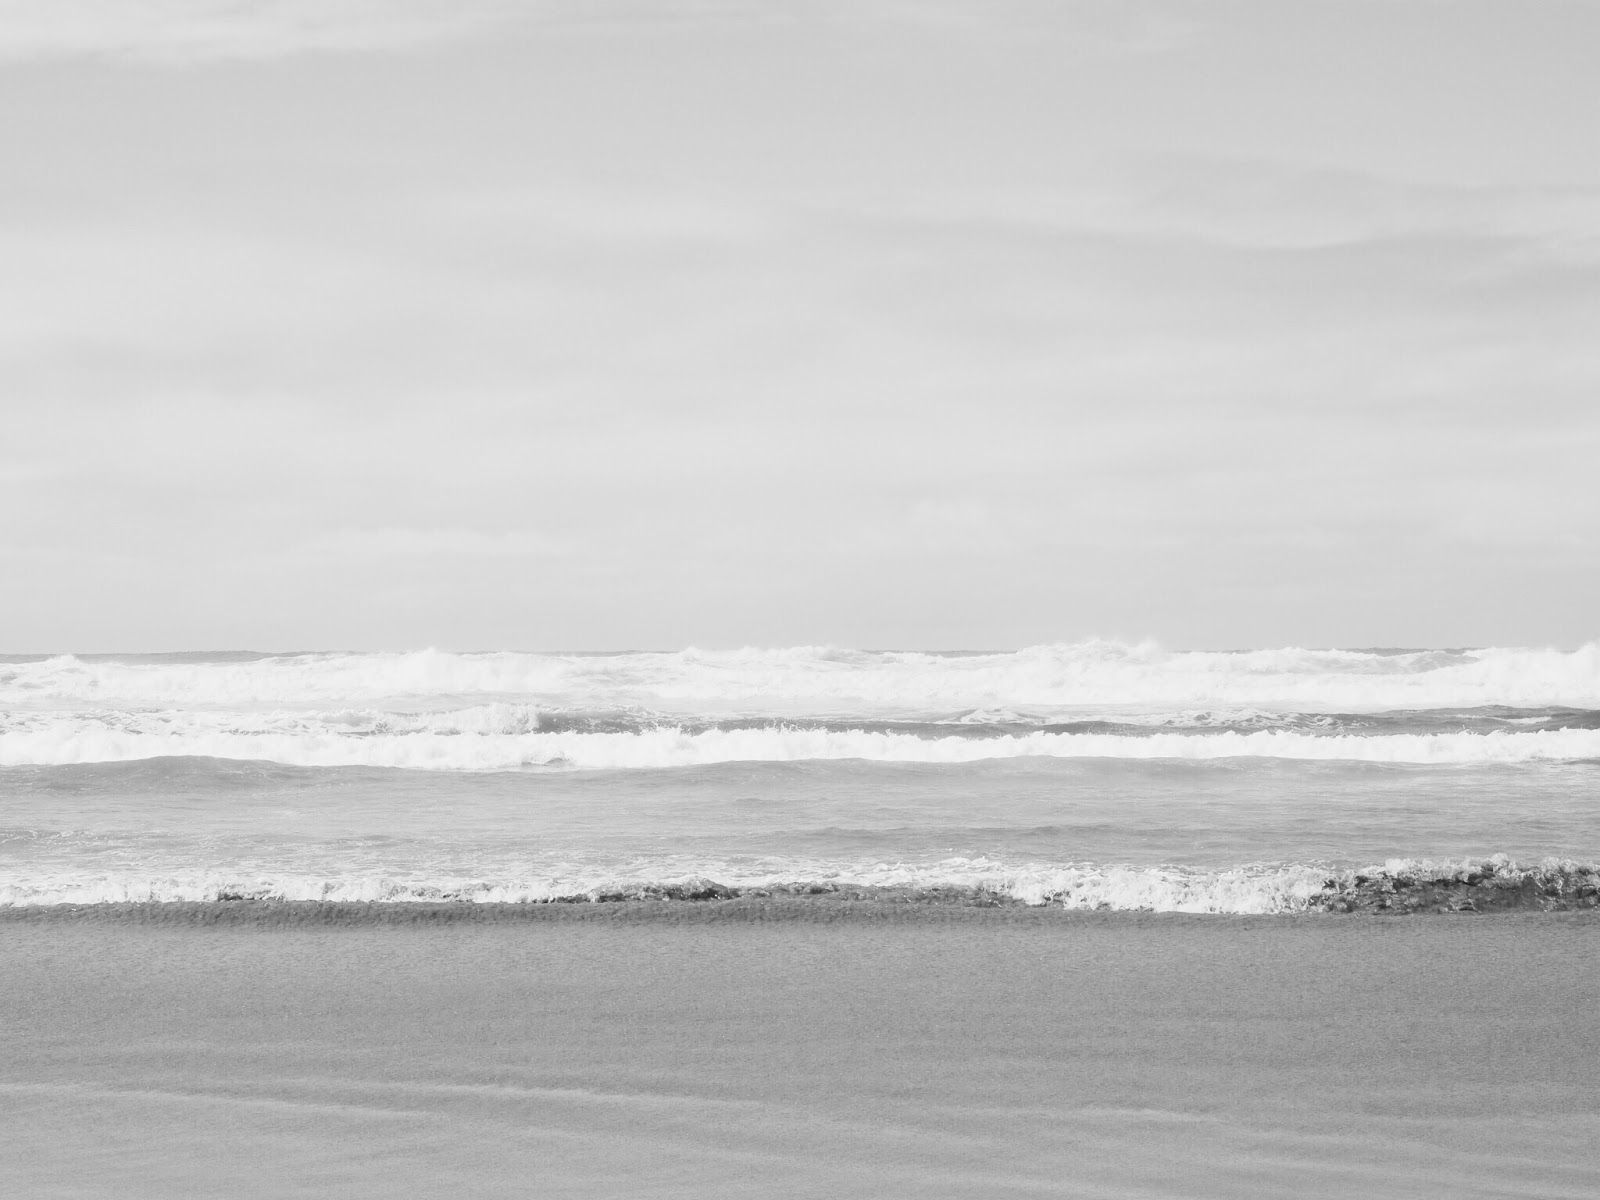 A black and white photo of a sandy beach with crashing waves - Gray